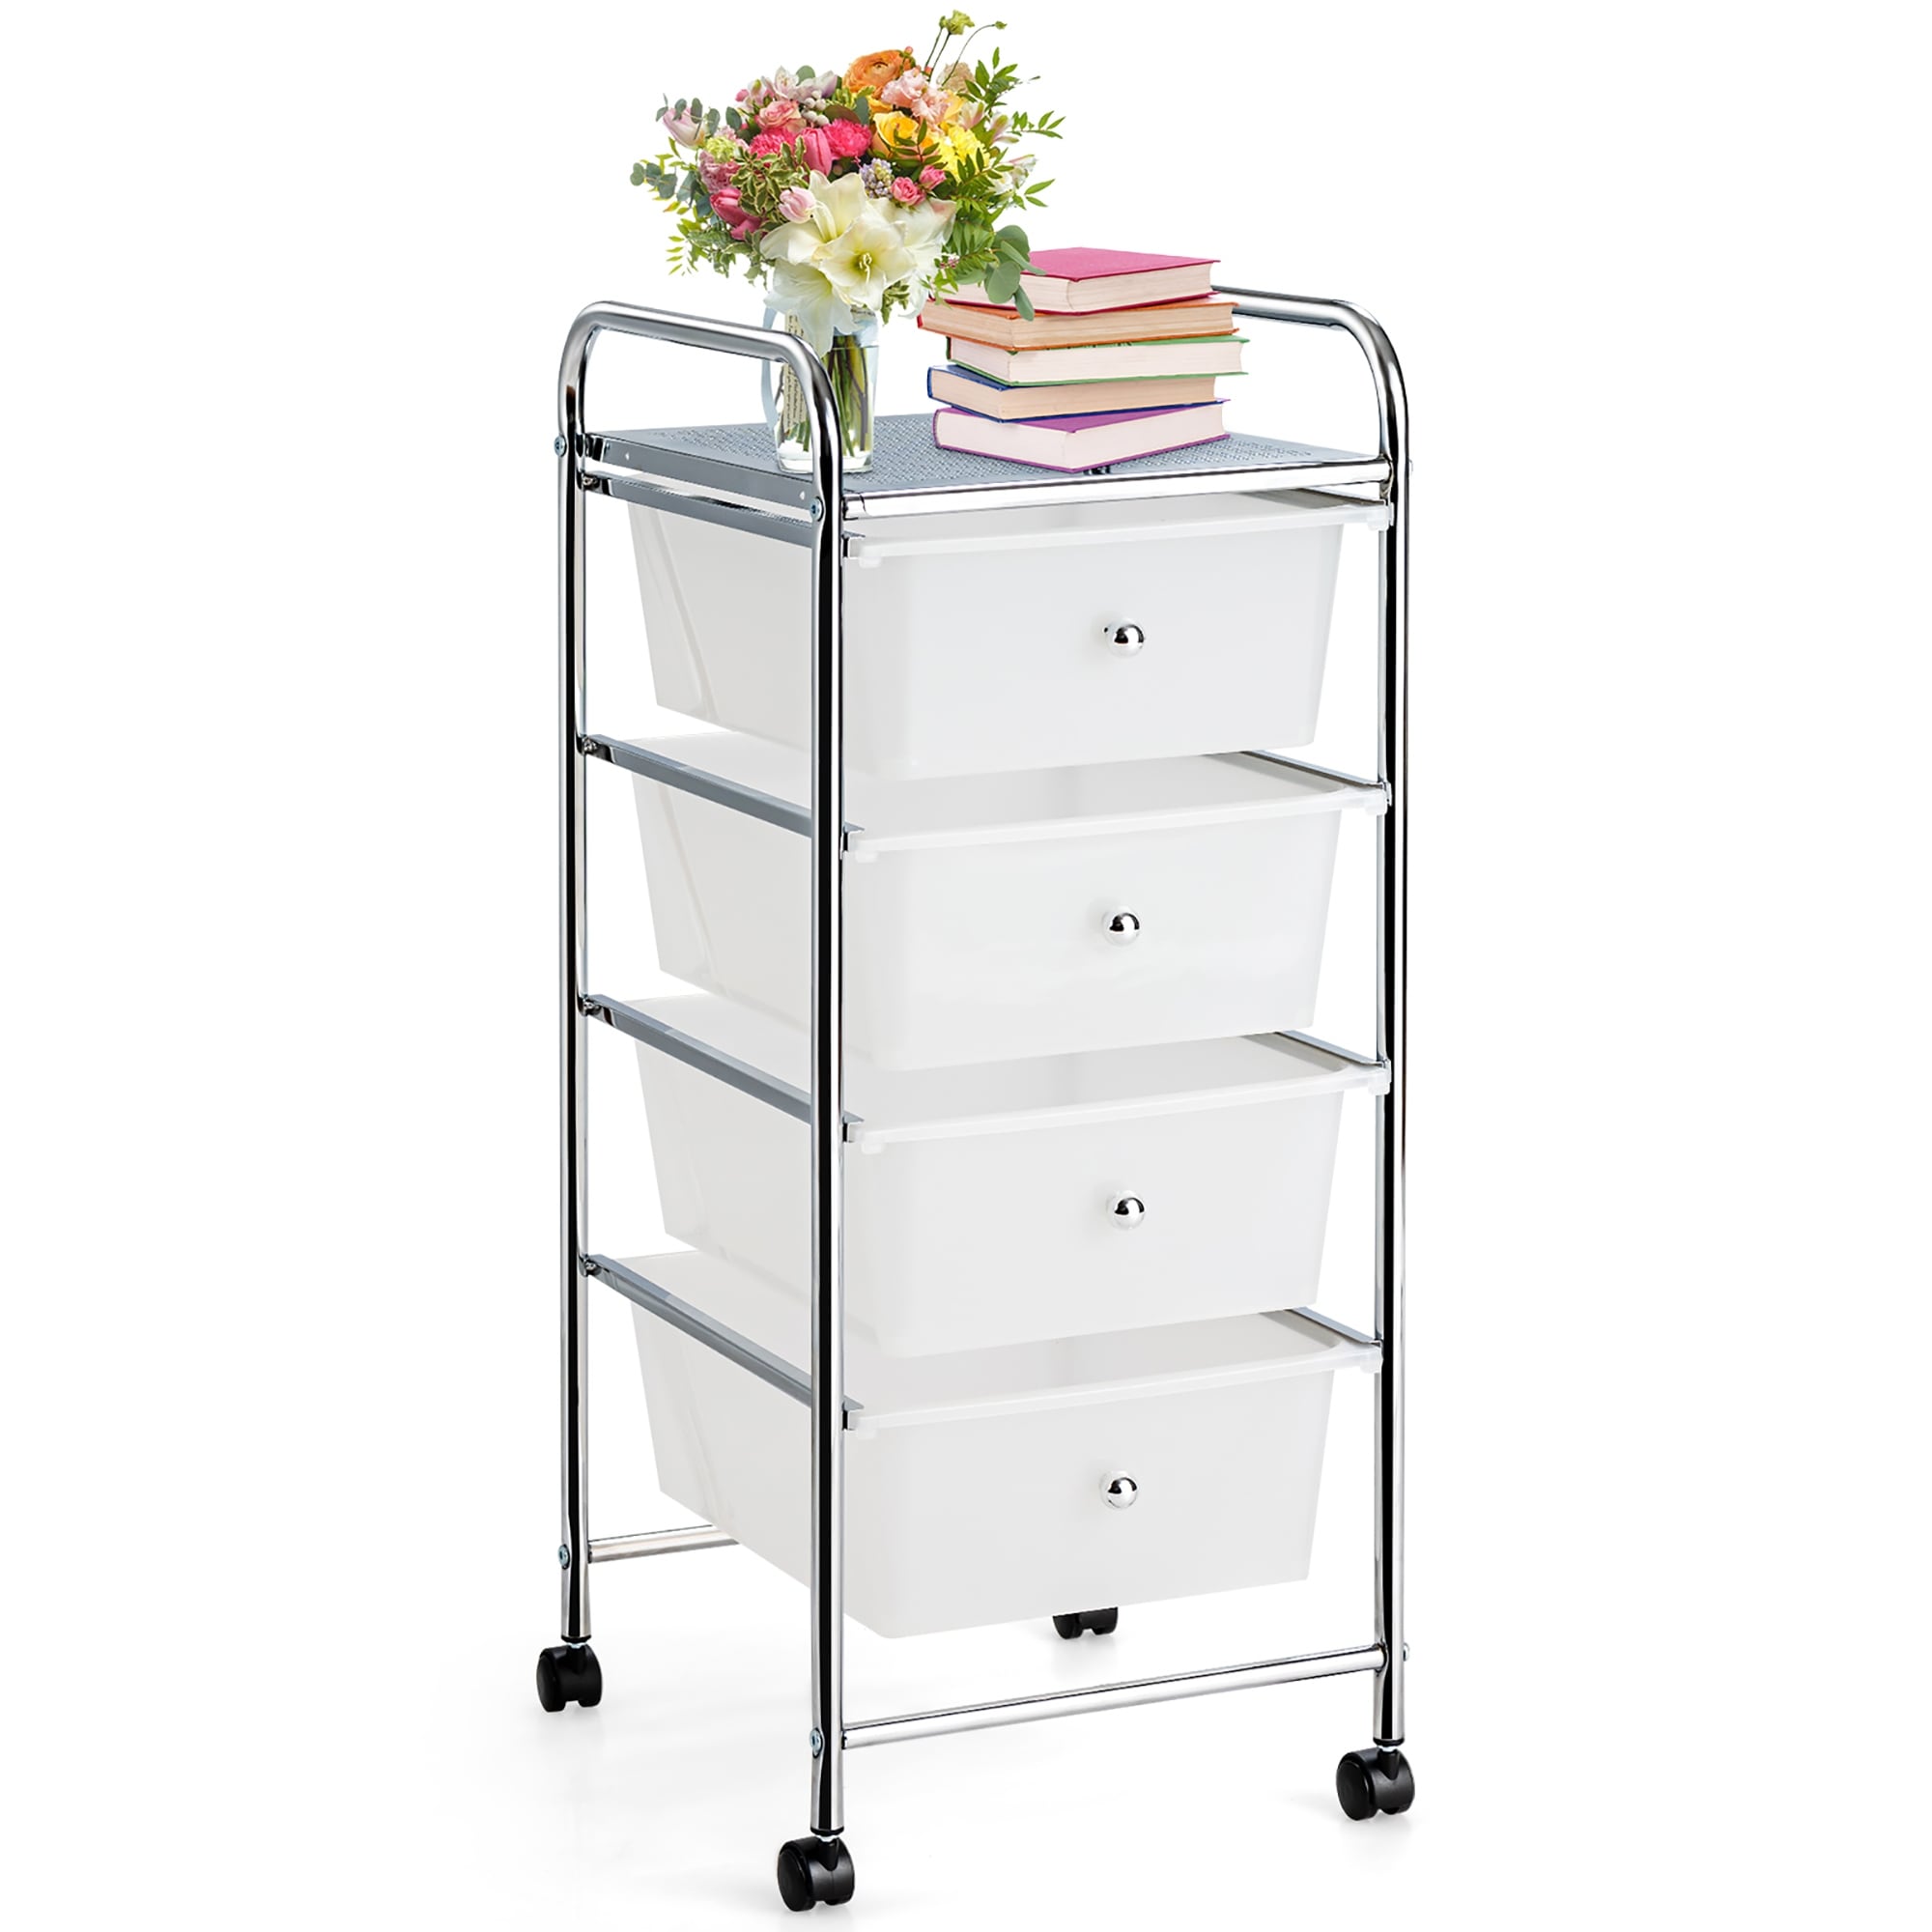 https://ak1.ostkcdn.com/images/products/is/images/direct/c2680802a28559a8ff67d657377de32ba48d3d90/4Tier-Rolling-Storage-Cart-4-Drawer-Mobile-Organizer-Cart-with-Casters.jpg